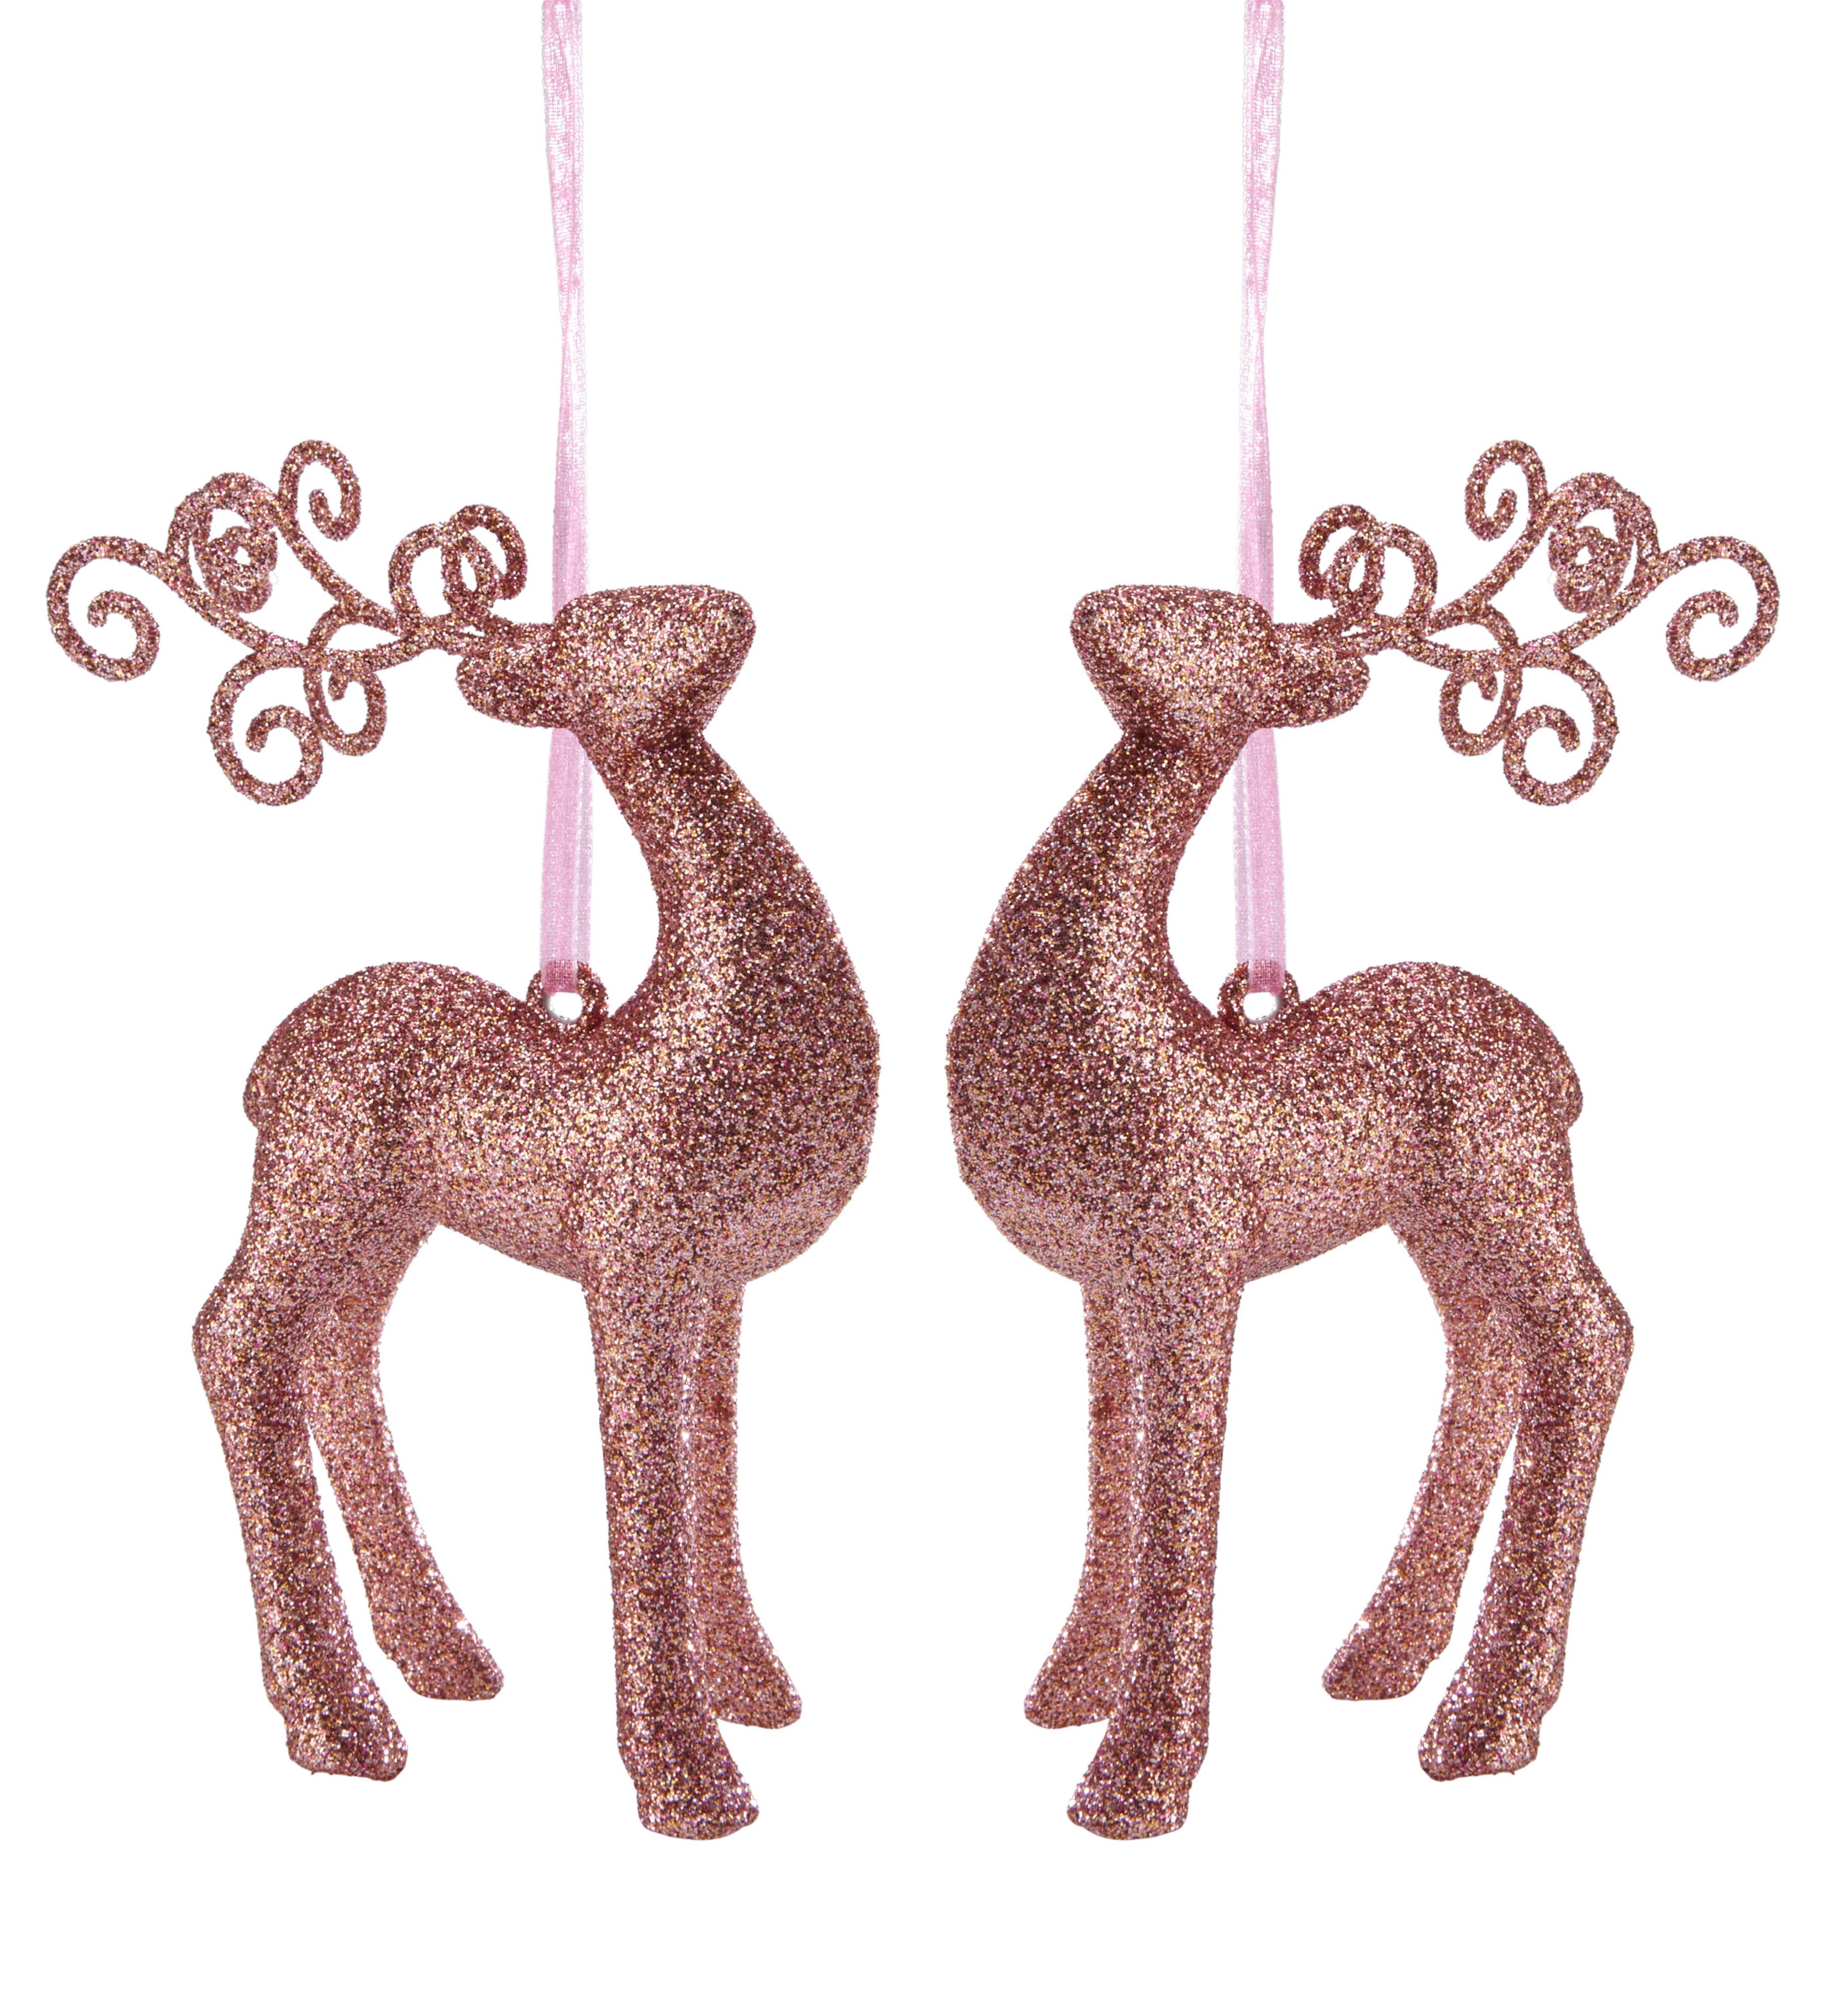 Glittered Reindeer Decoration Pack Of 2 Departments Diy At Bandq